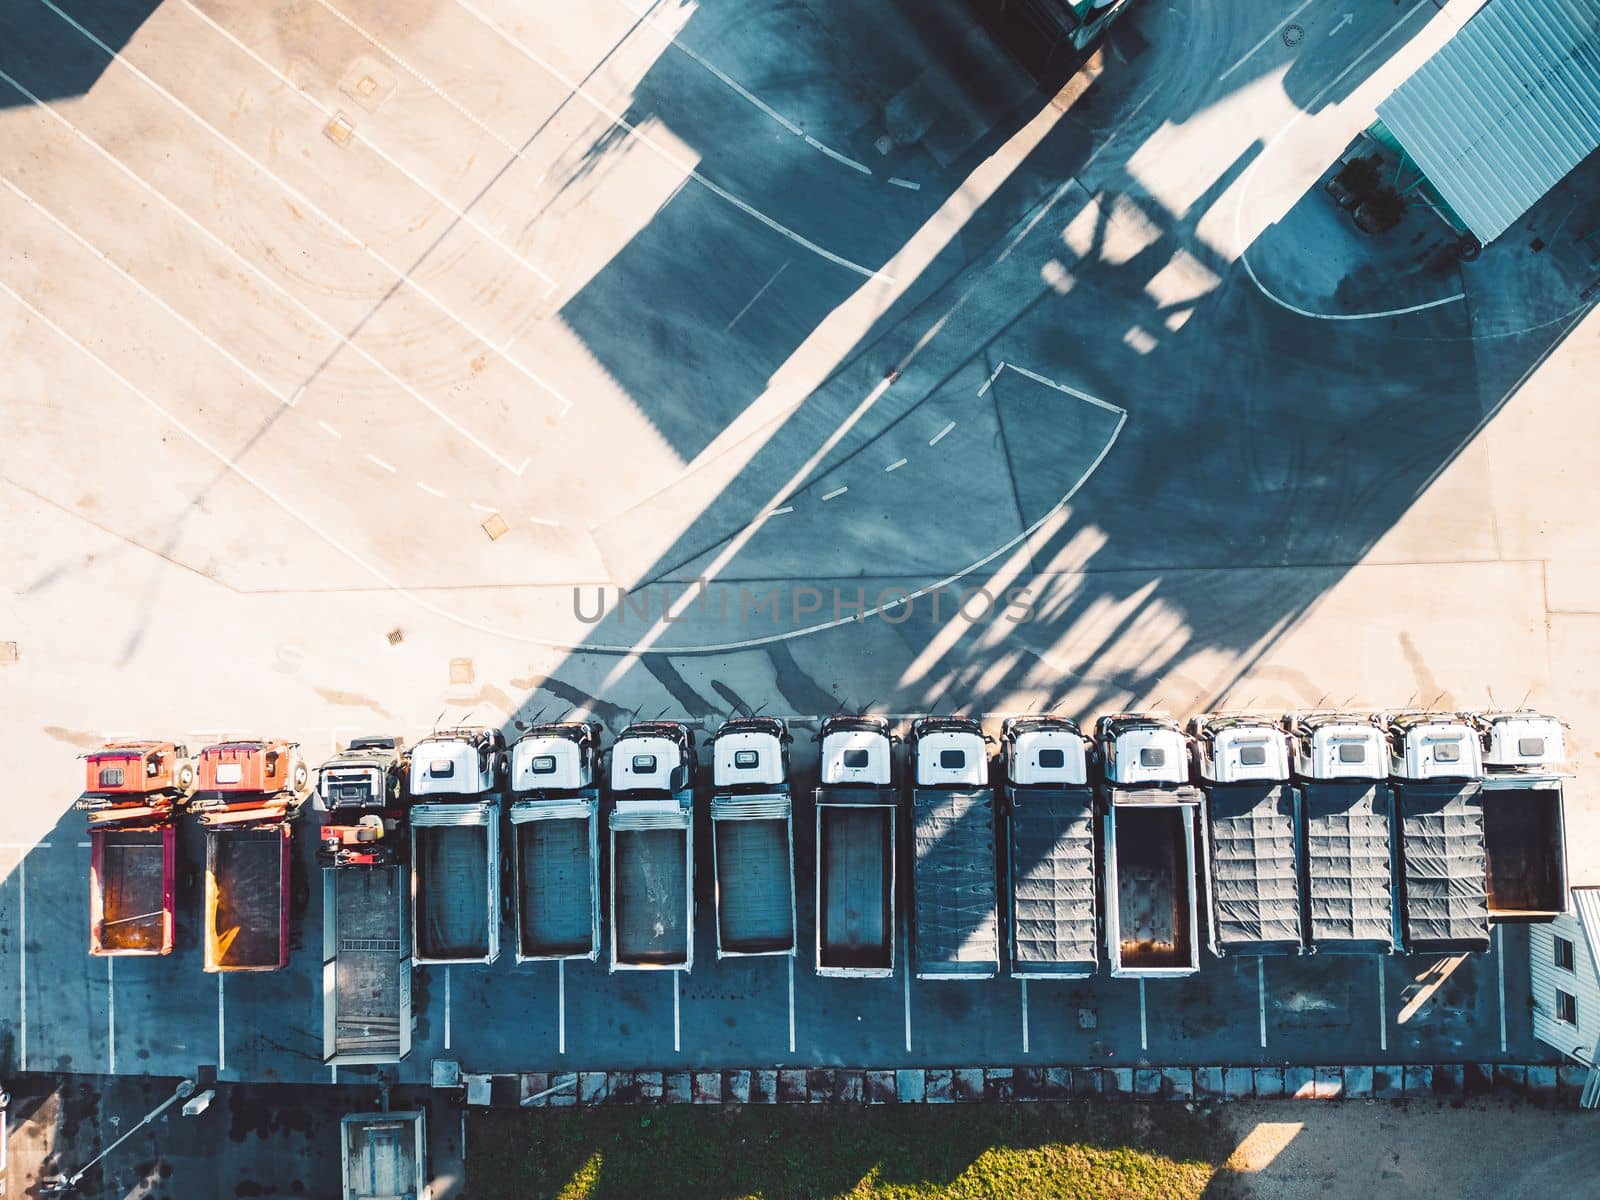 Top down view of construction trucks parked in a line at the road repair base by VisualProductions